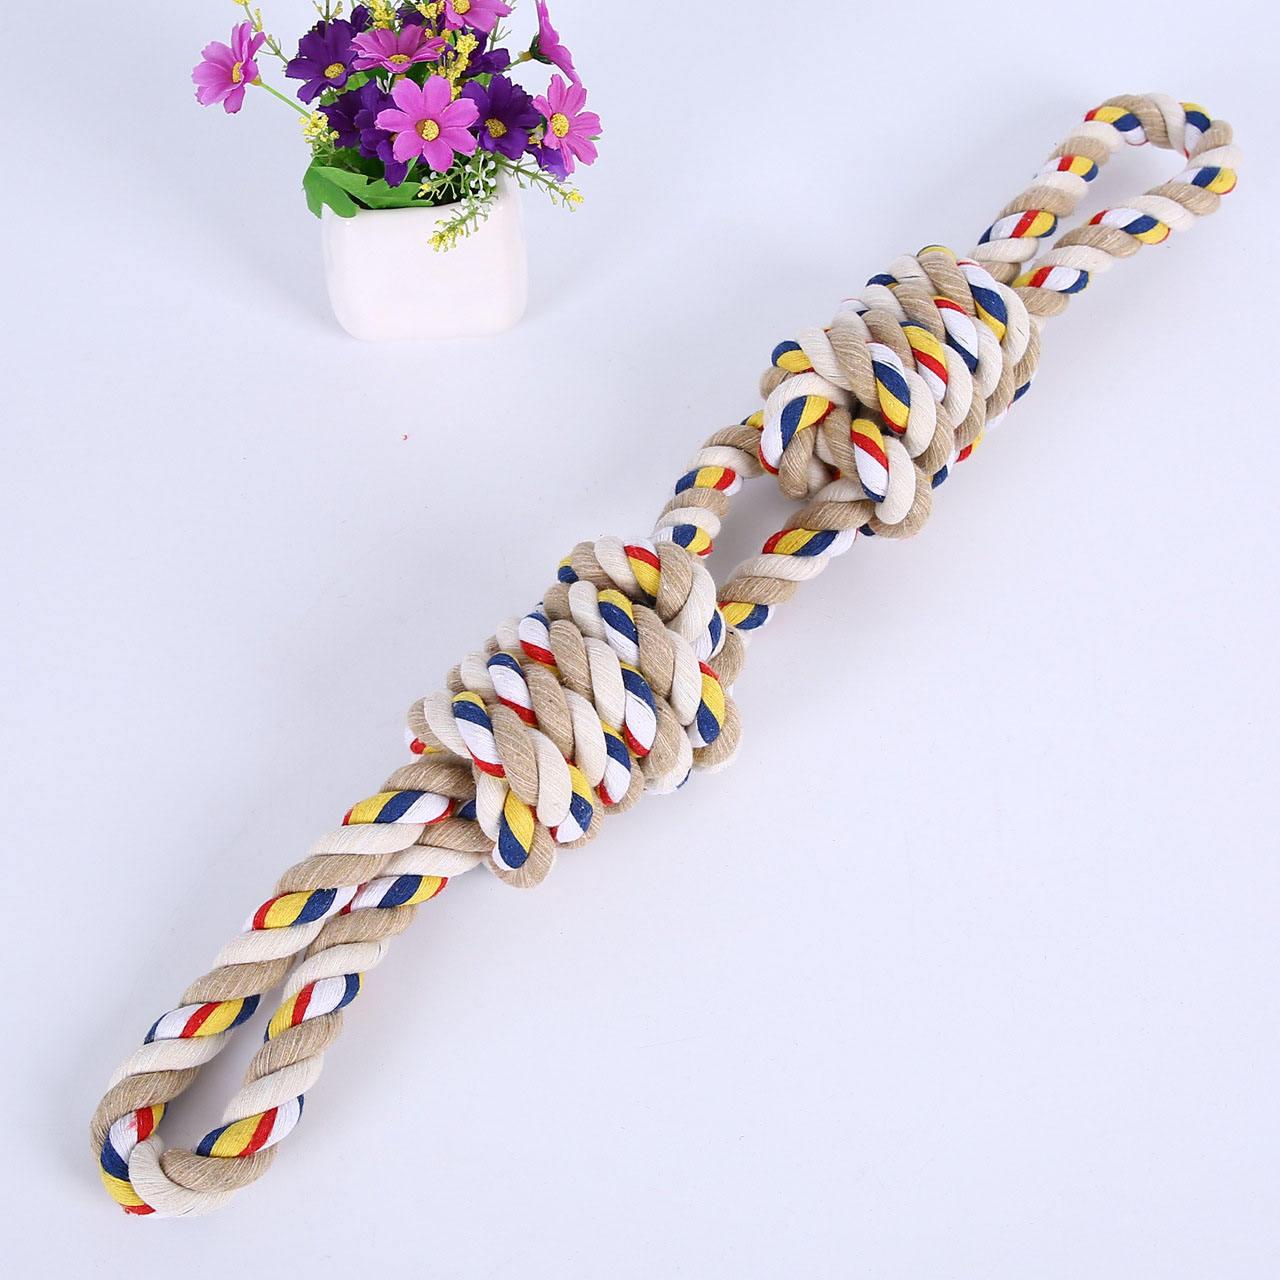 Heavy Duty Dog Chew Toys Large Dog Teething Toys Ropes Rope For Aggressive Chewers Large Breed